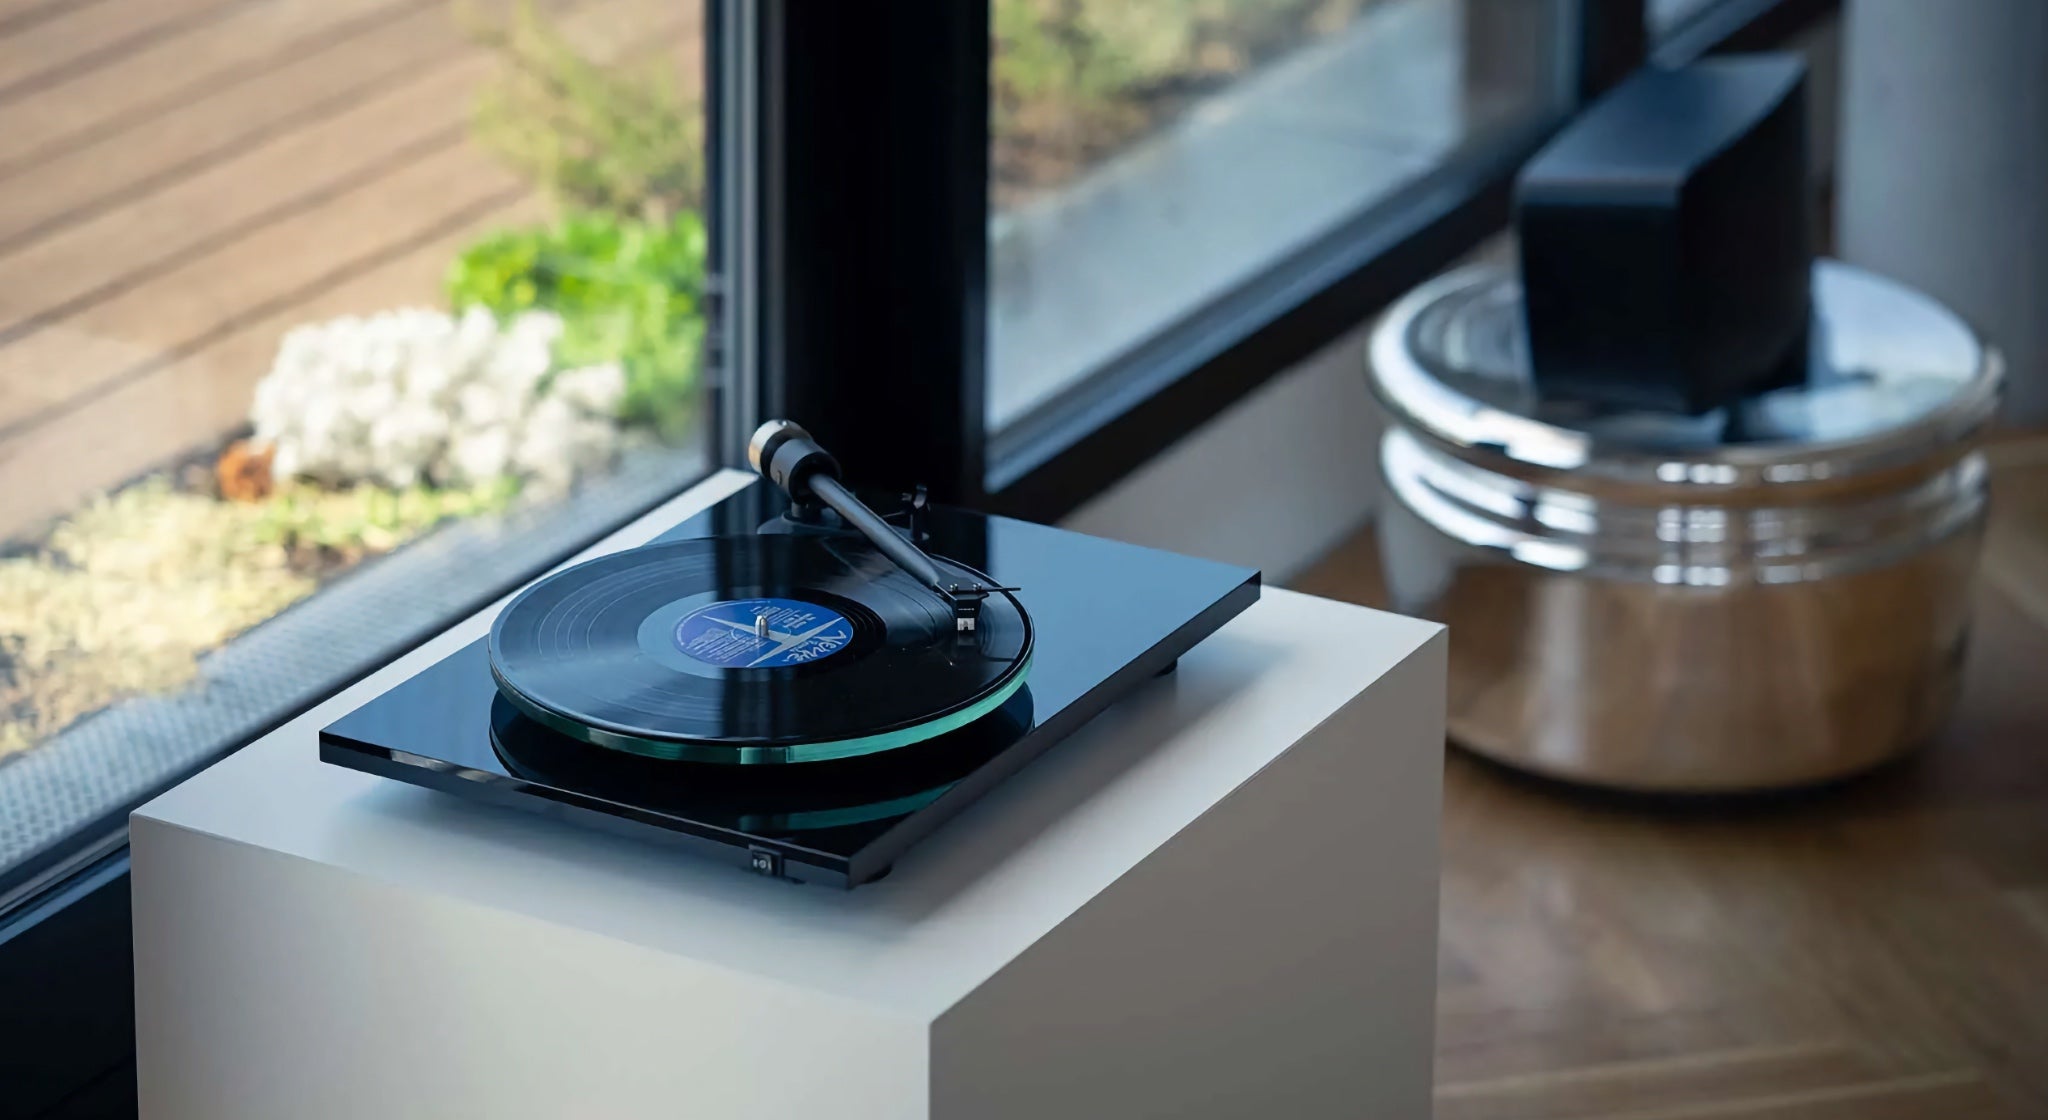 Pro-Ject T2 black on white decorative cabinet in living space